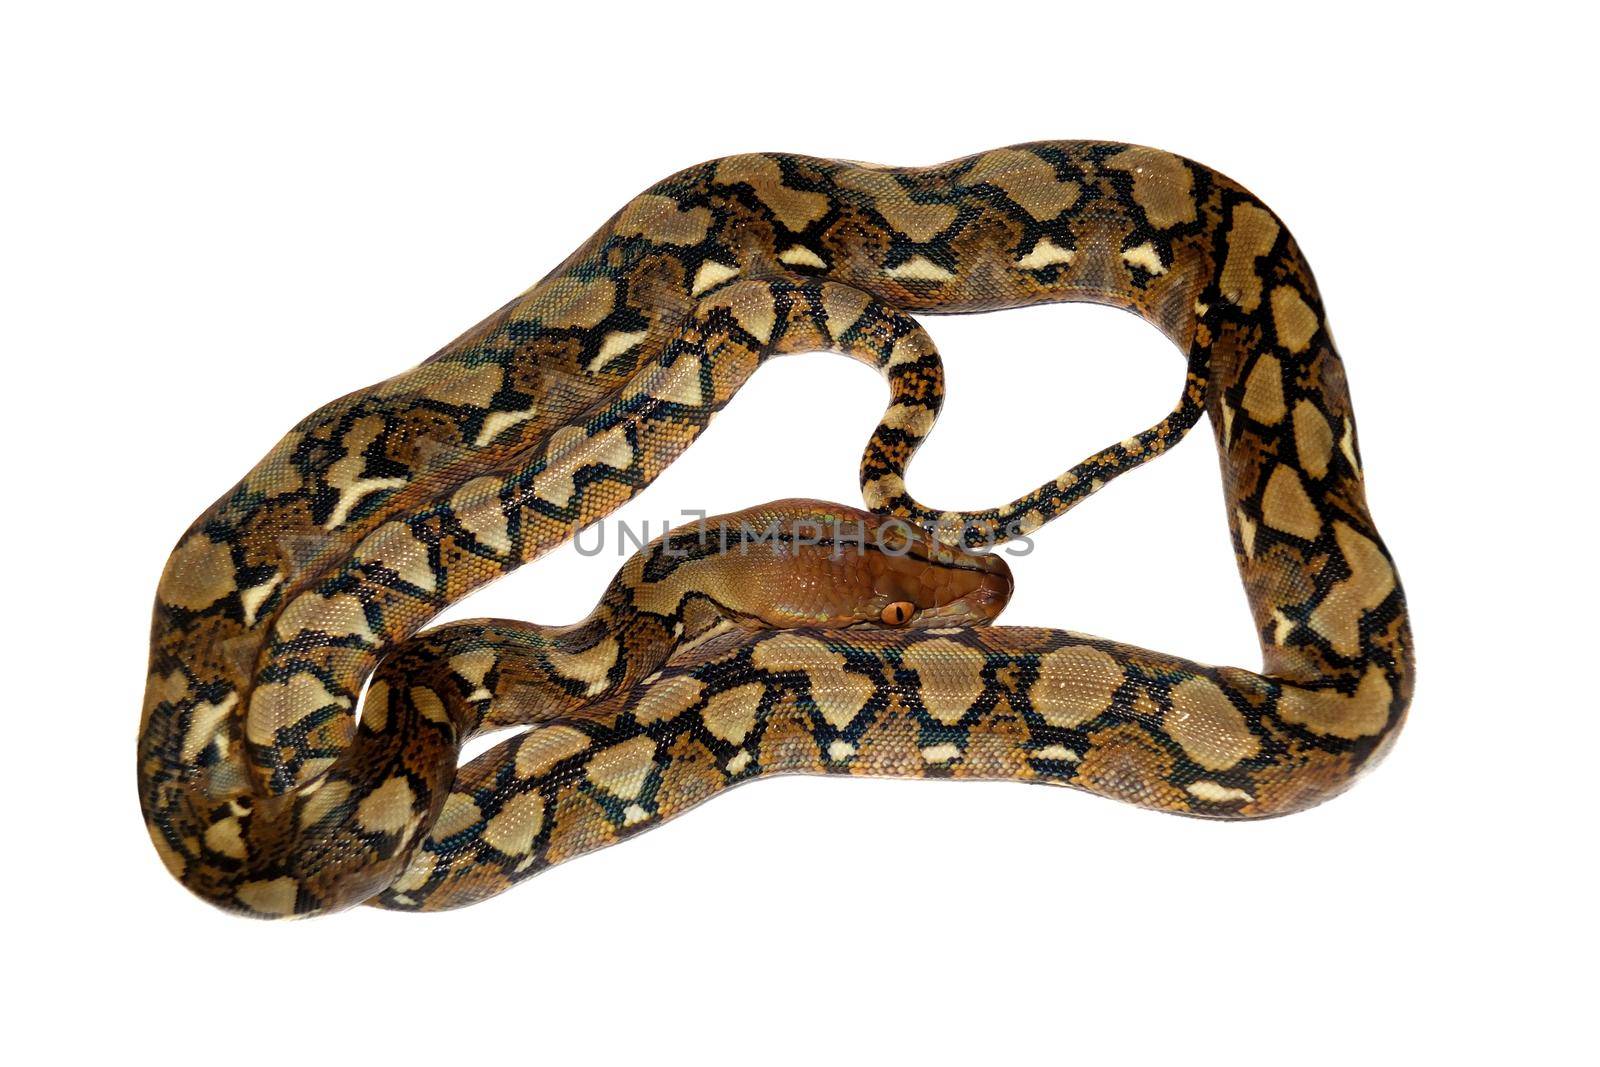 Reticulated Python on white background by RosaJay